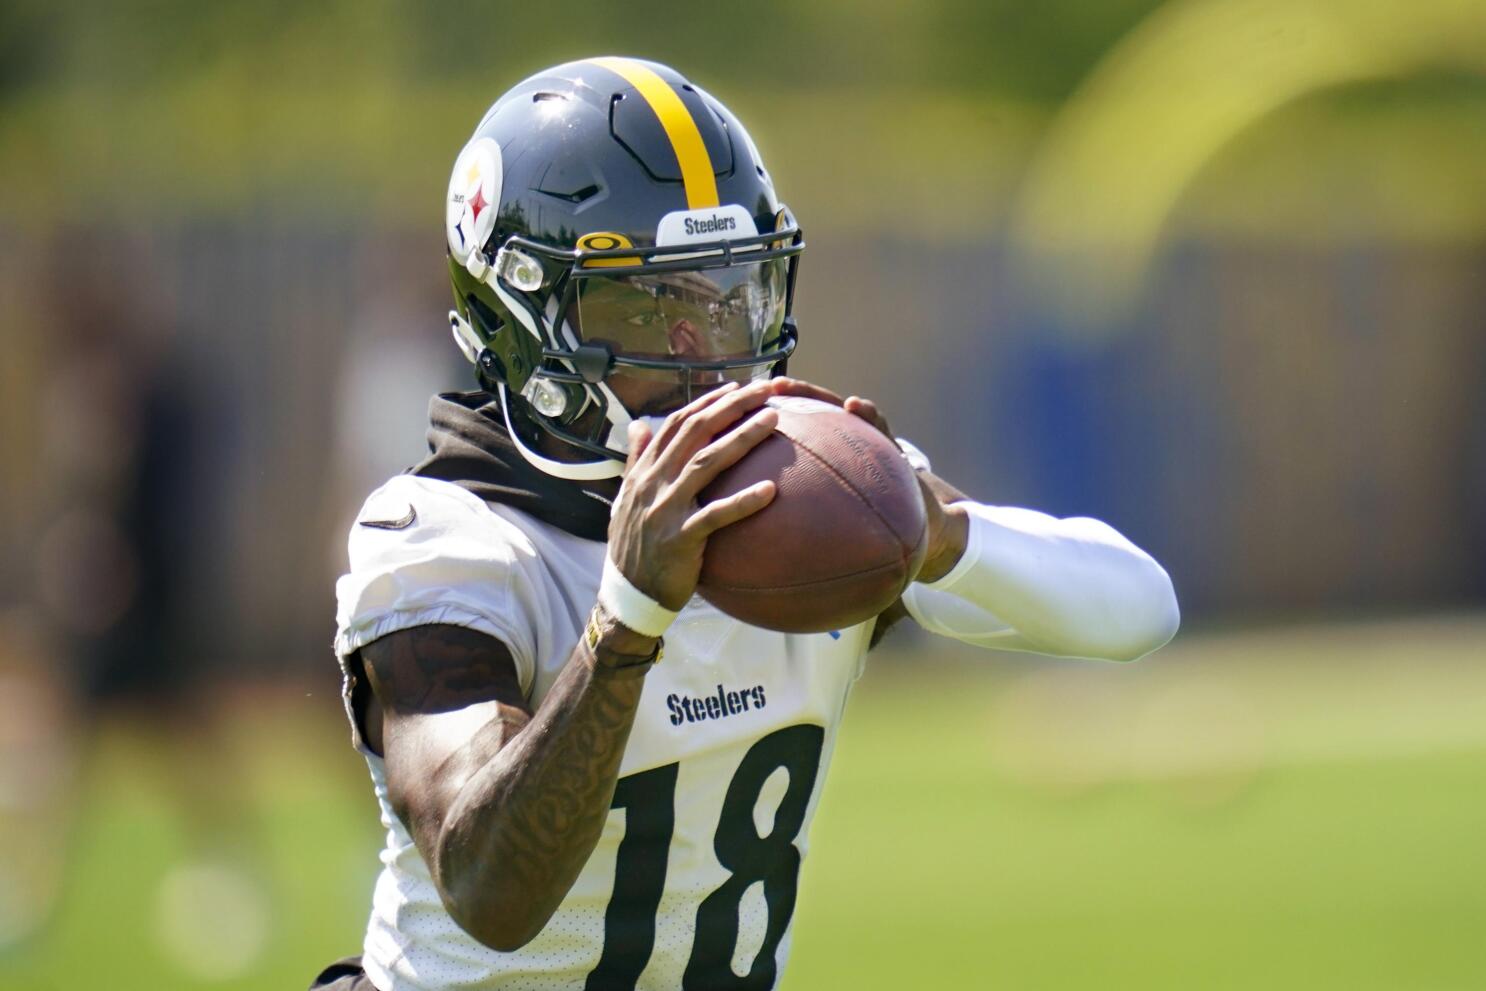 Steelers WR Calvin Austin III looks healthy and fast at OTAs